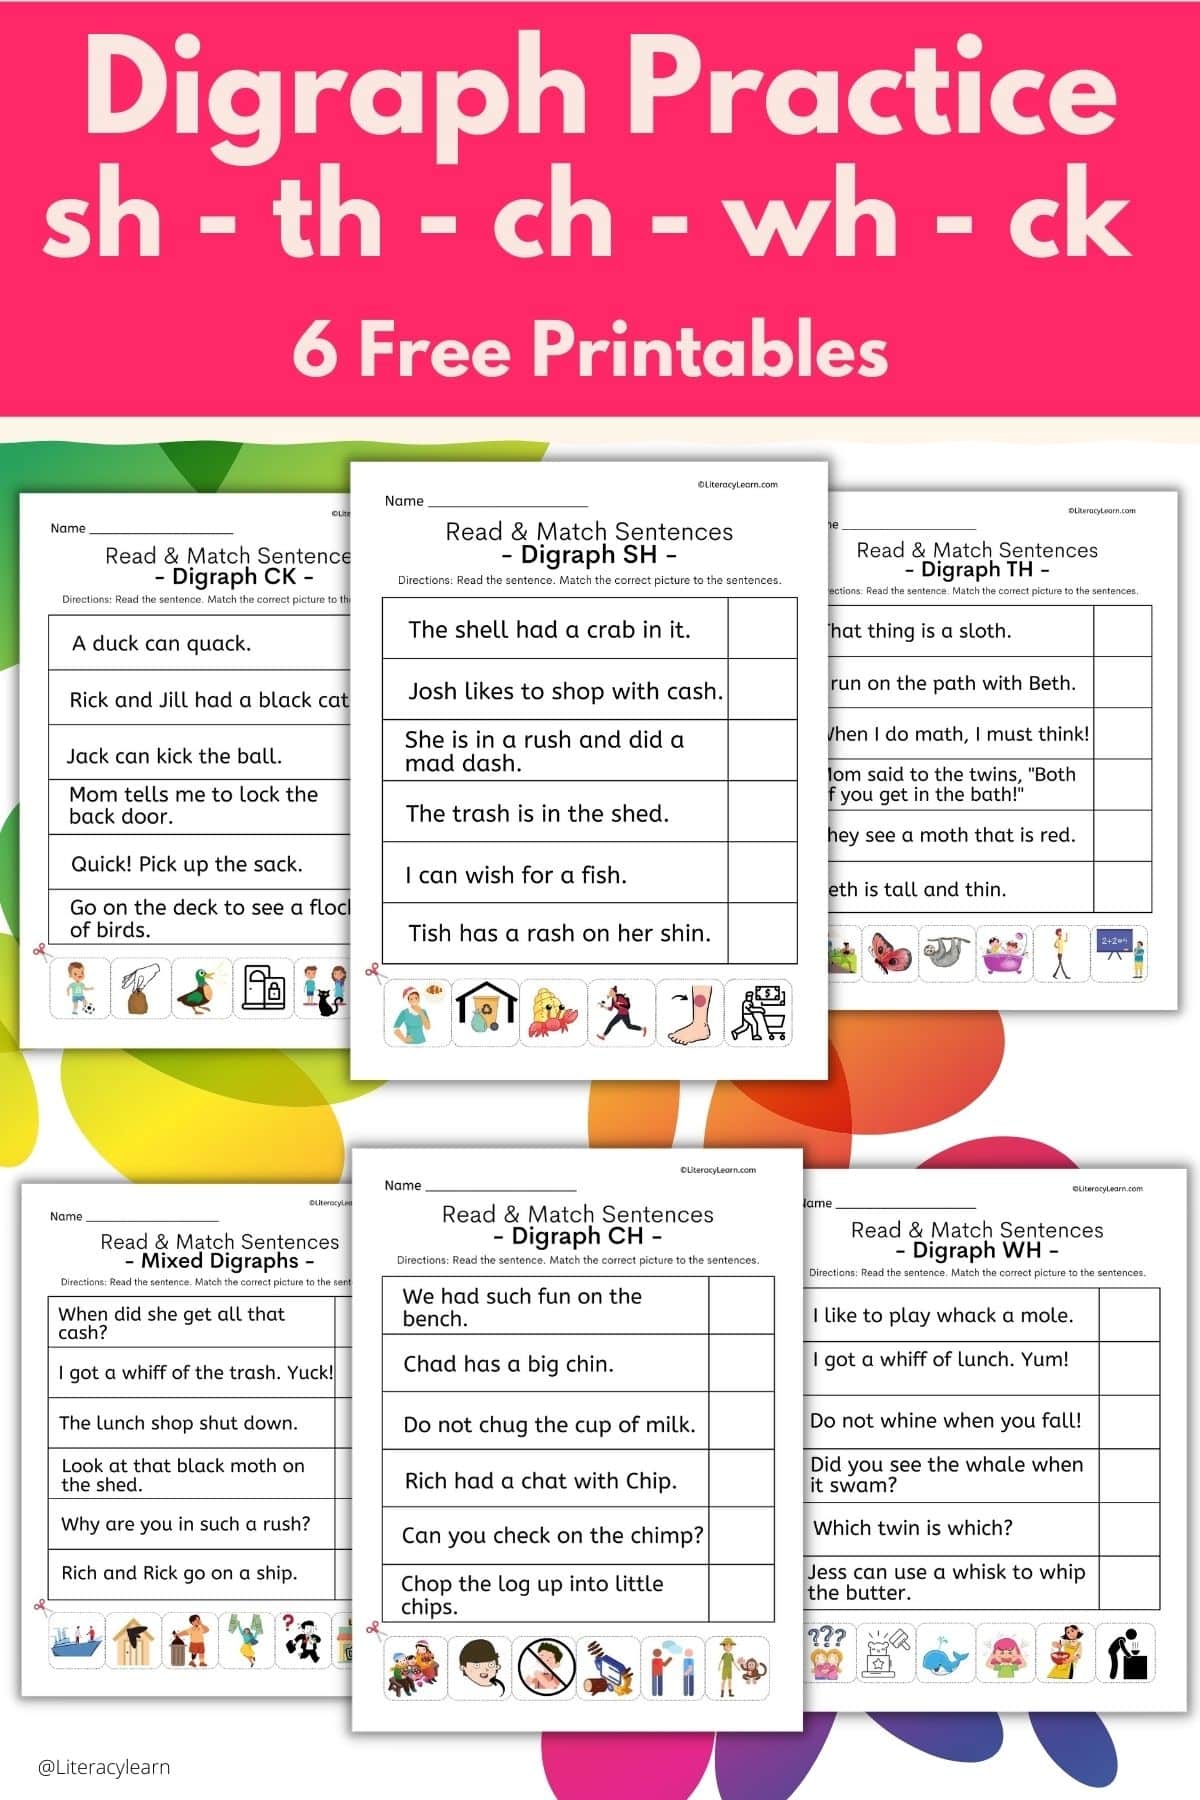 Large font advertising "Digraph Practice: Free Printable" with the six samples of worksheets.